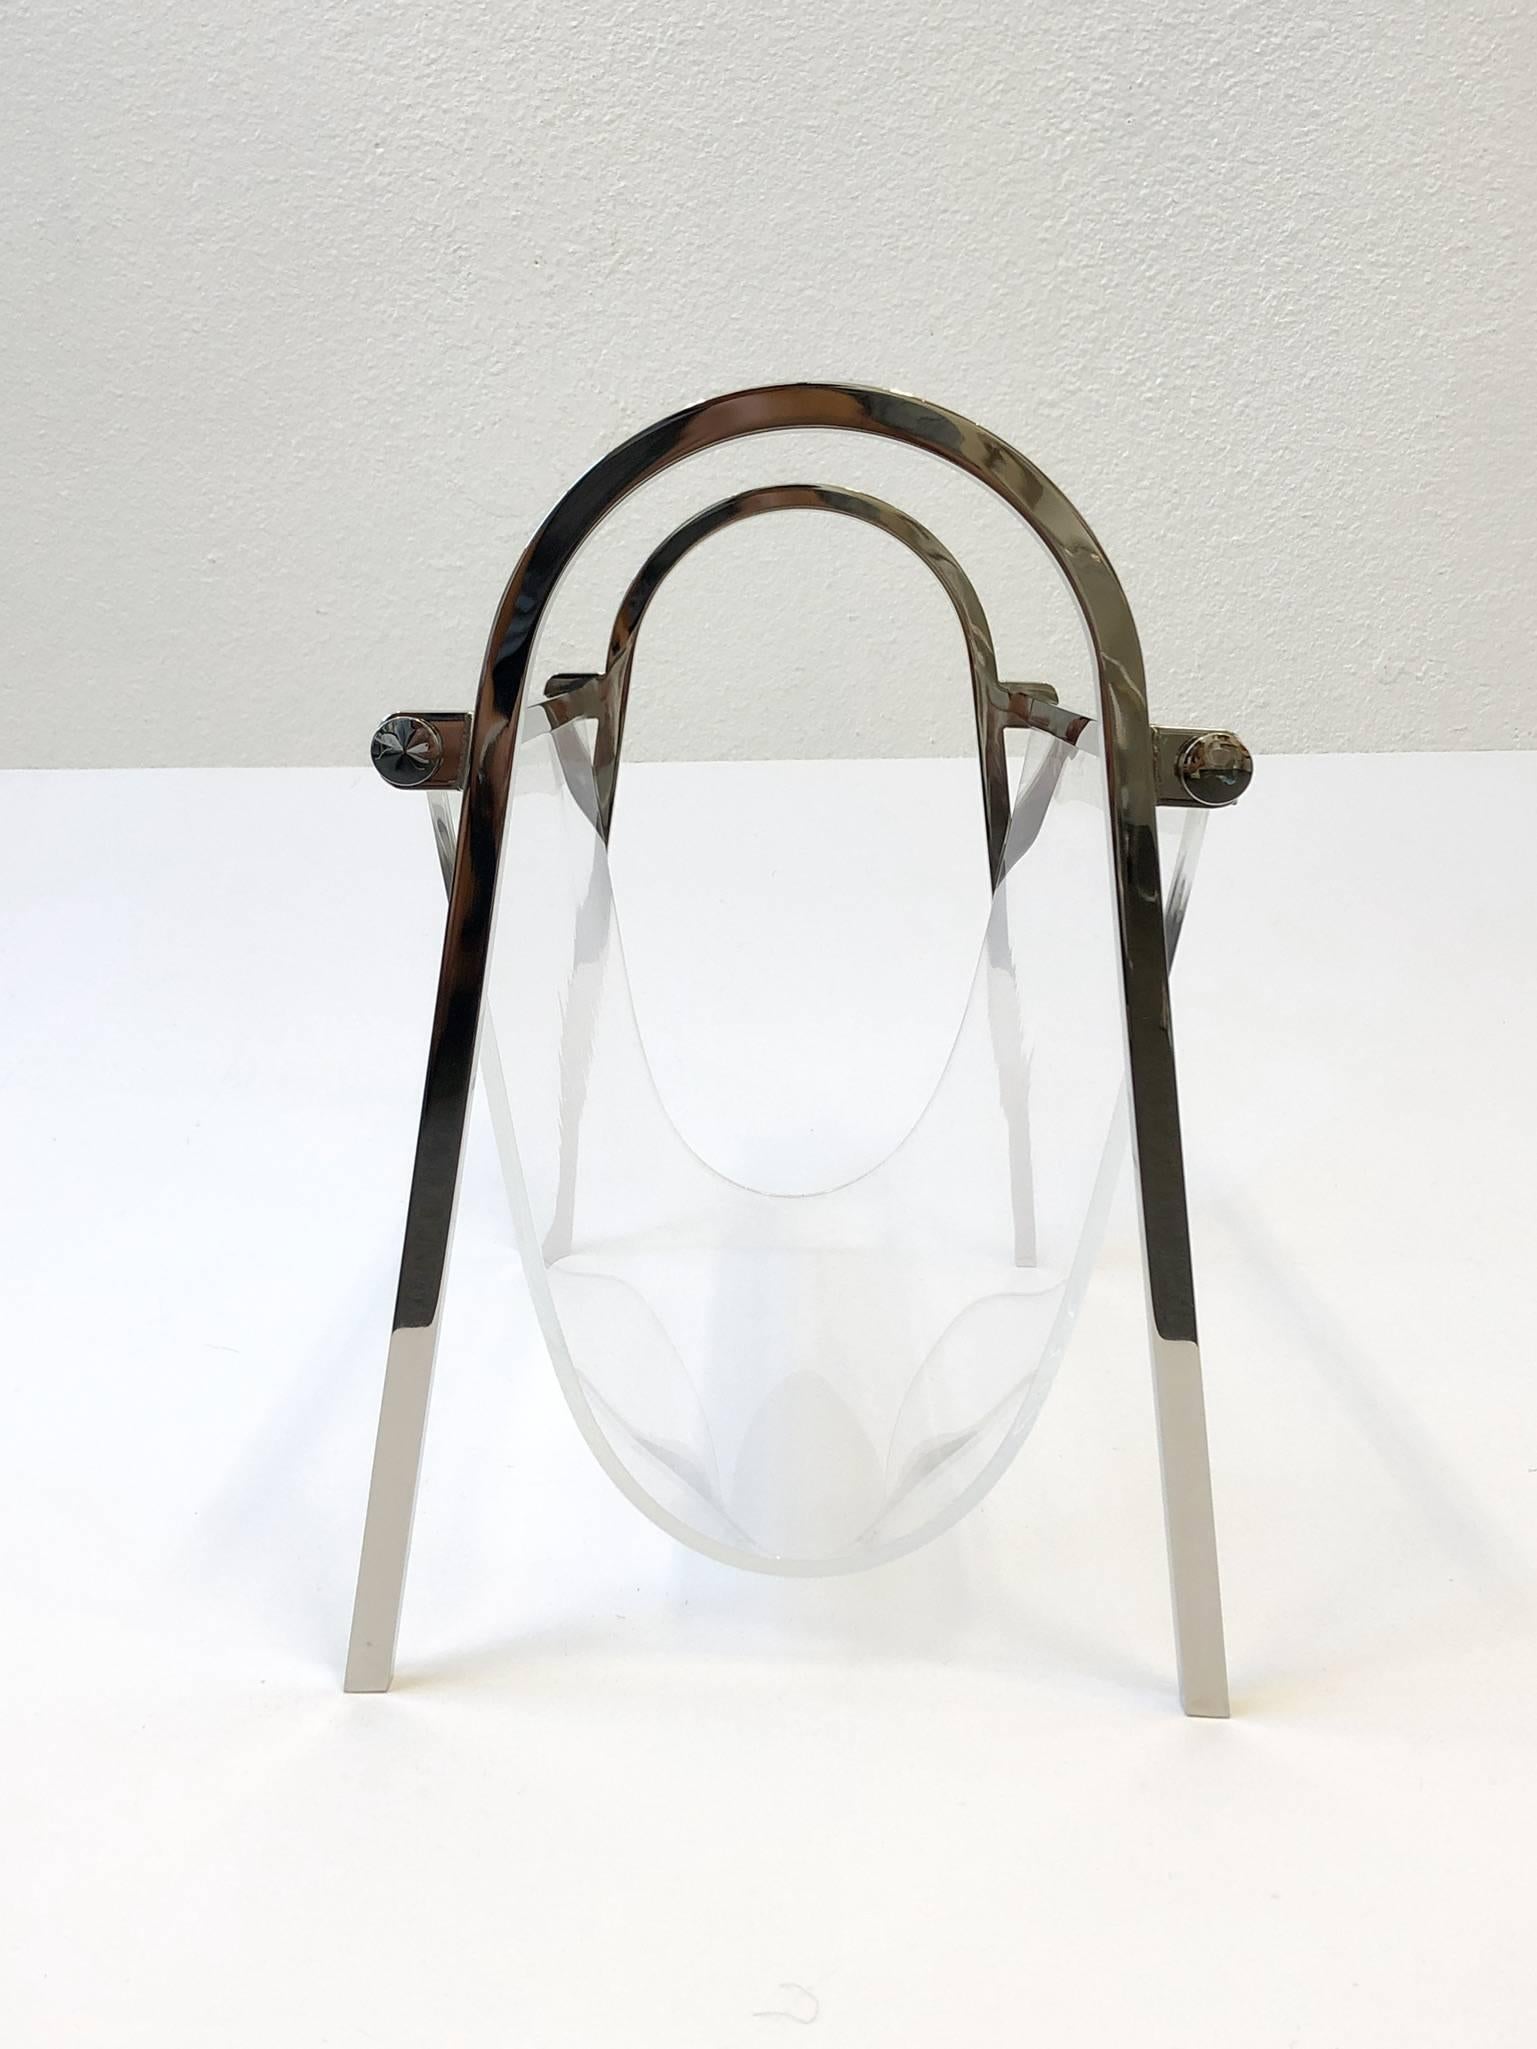 A beautiful 1970s polish nickel and clear Lucite “Arch Line” magazine holder by Charles Hollis Jones. 

Dimensions: 14.5” high 19” wide 10” deep.